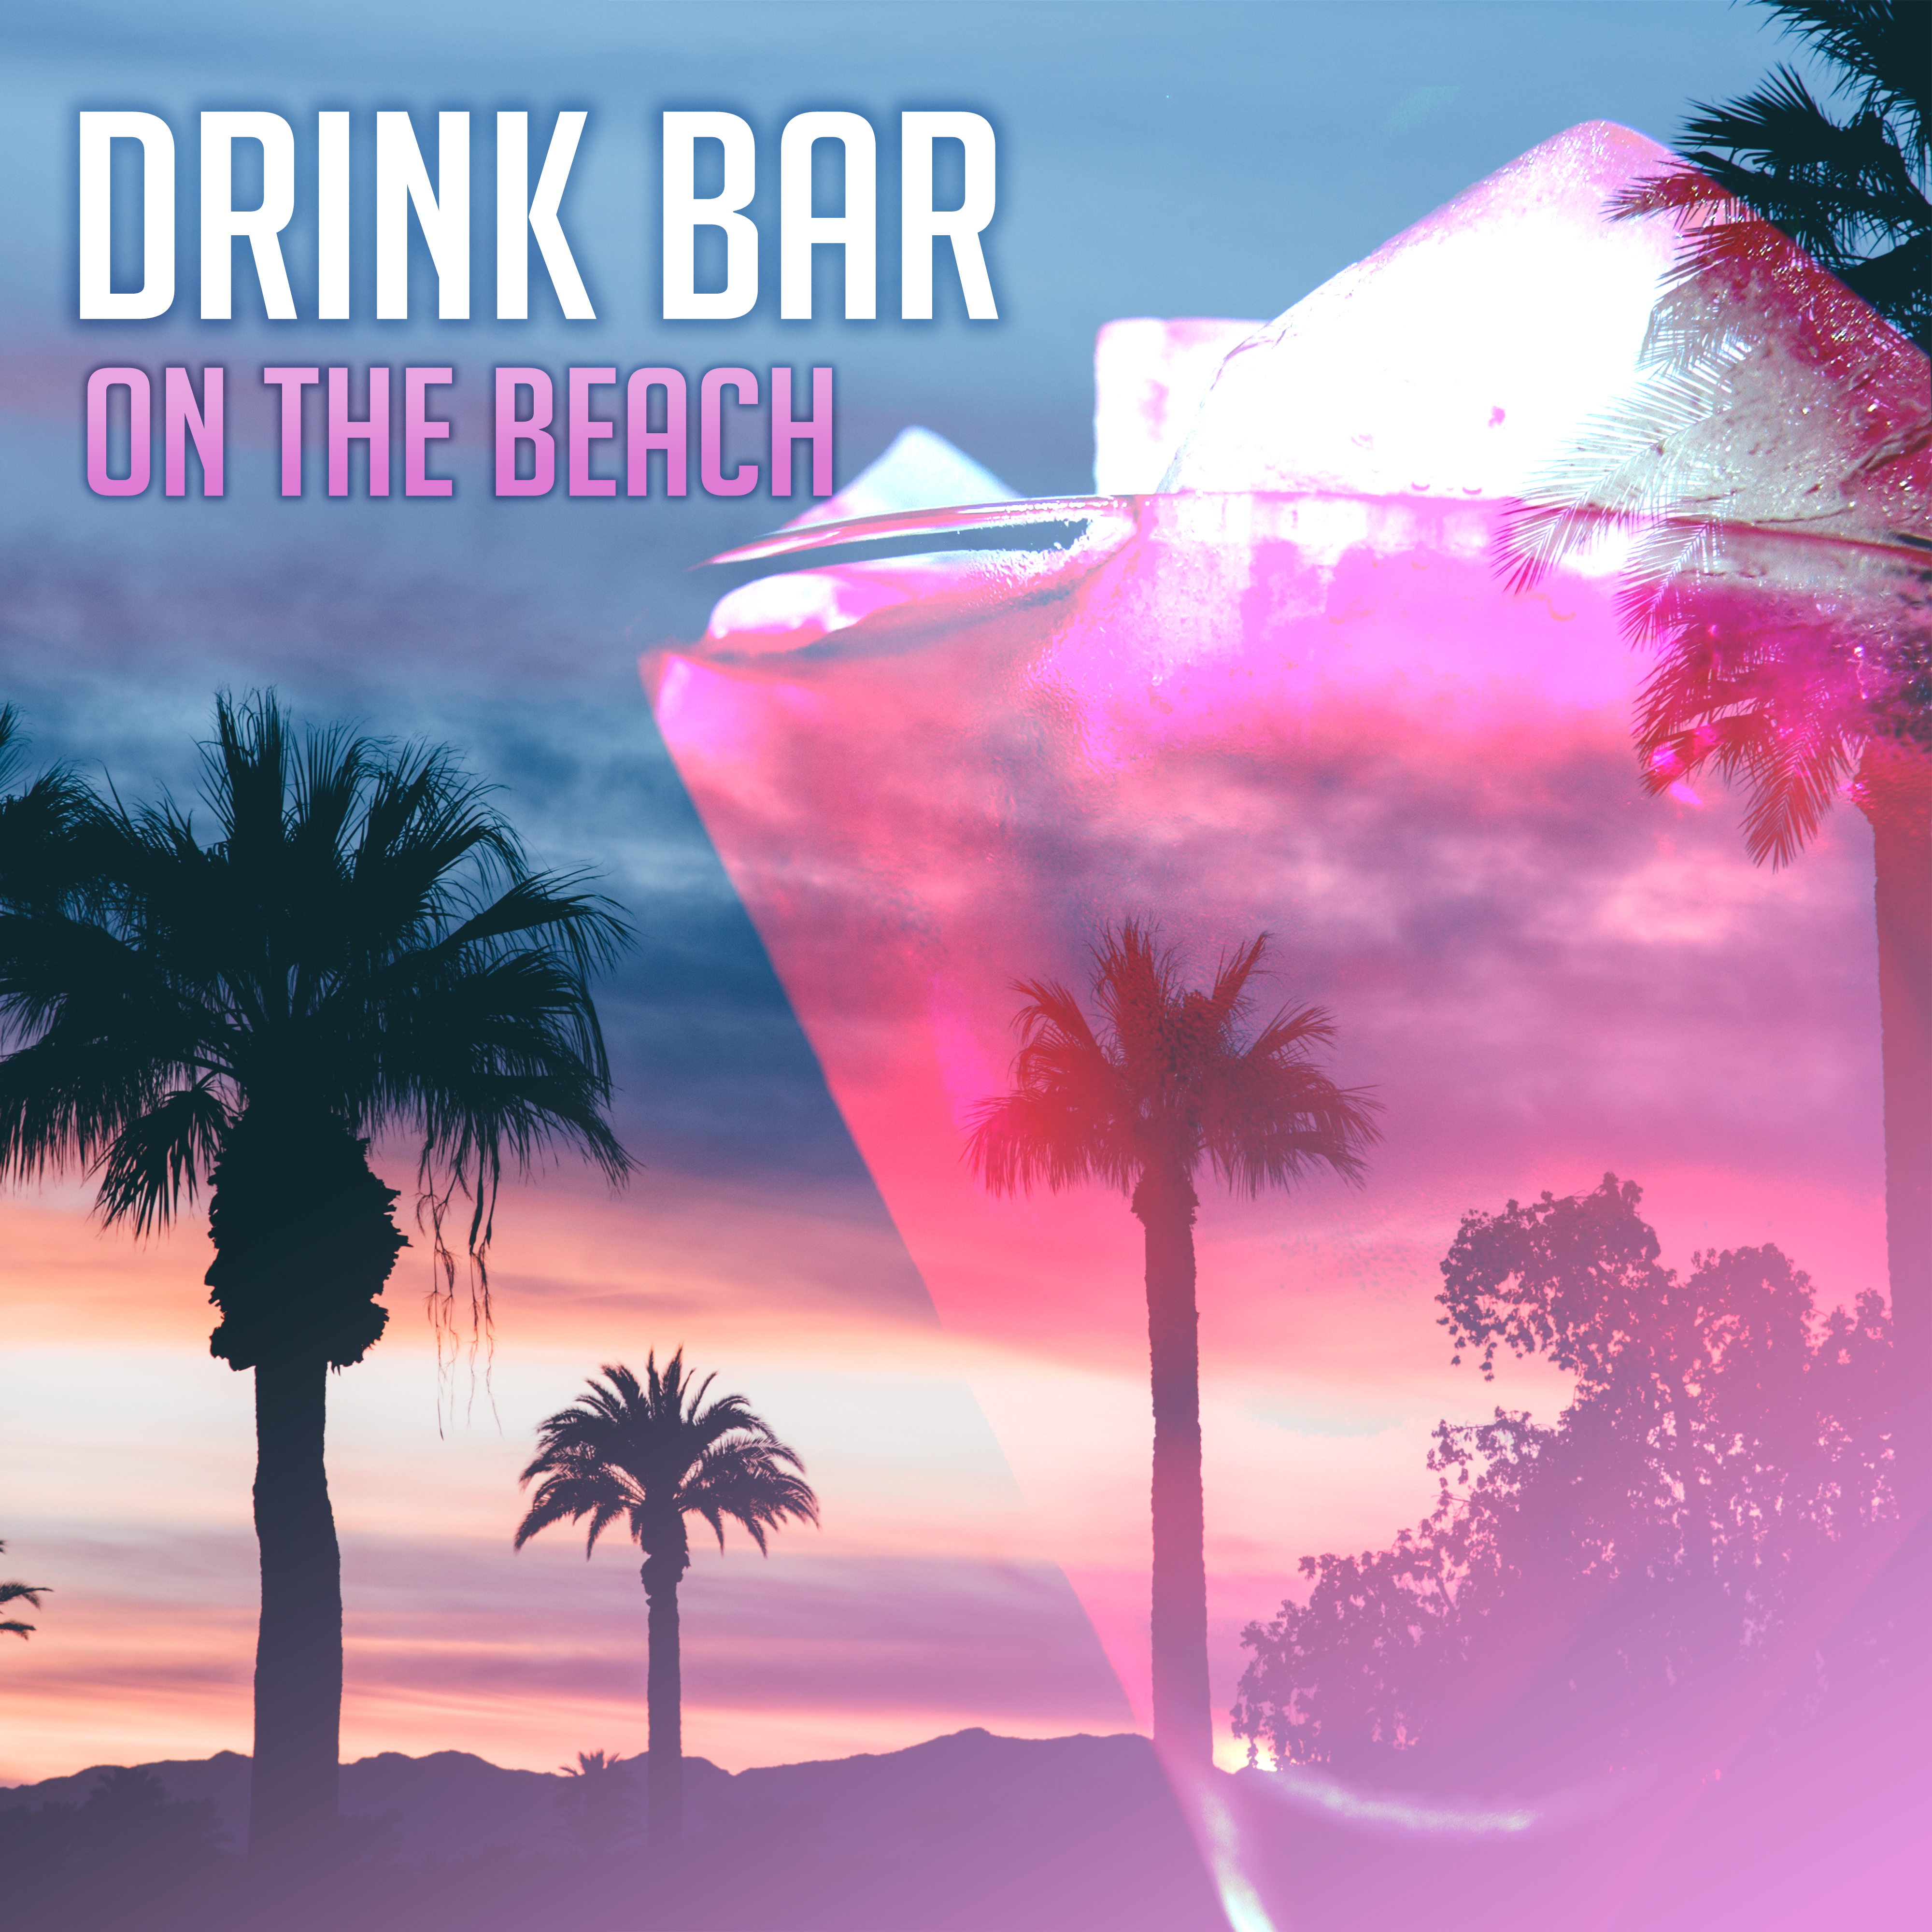 Drink Bar on the Beach  Total Relax, Colorful Drinks, Beach Chill, Holiday Songs, Summertime 2017, Rest Under Palms